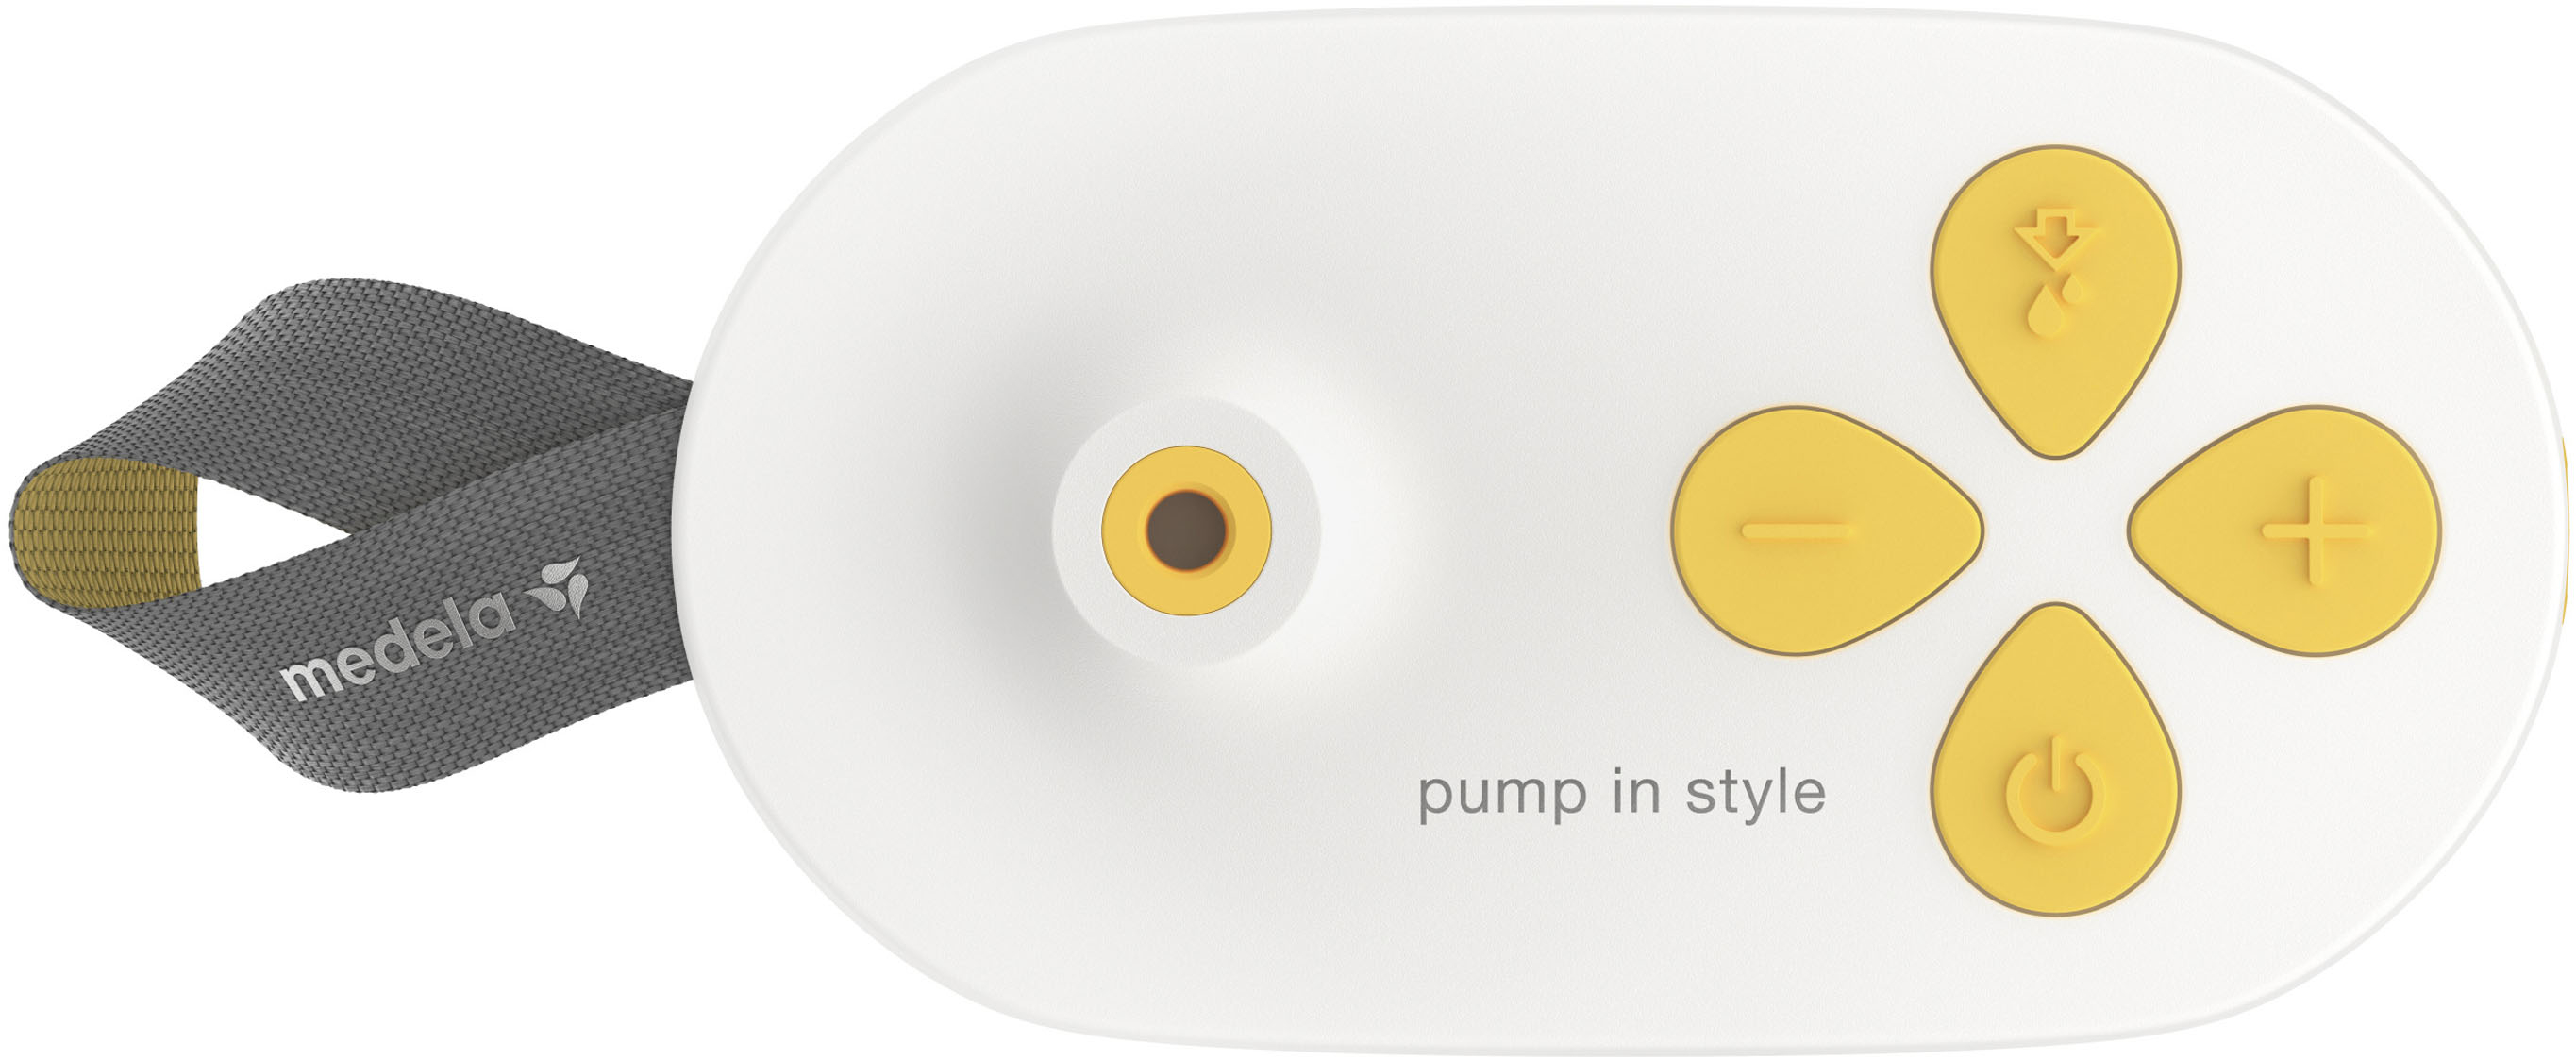 Medela, Extractor Pump In Style MaxFlow Basic